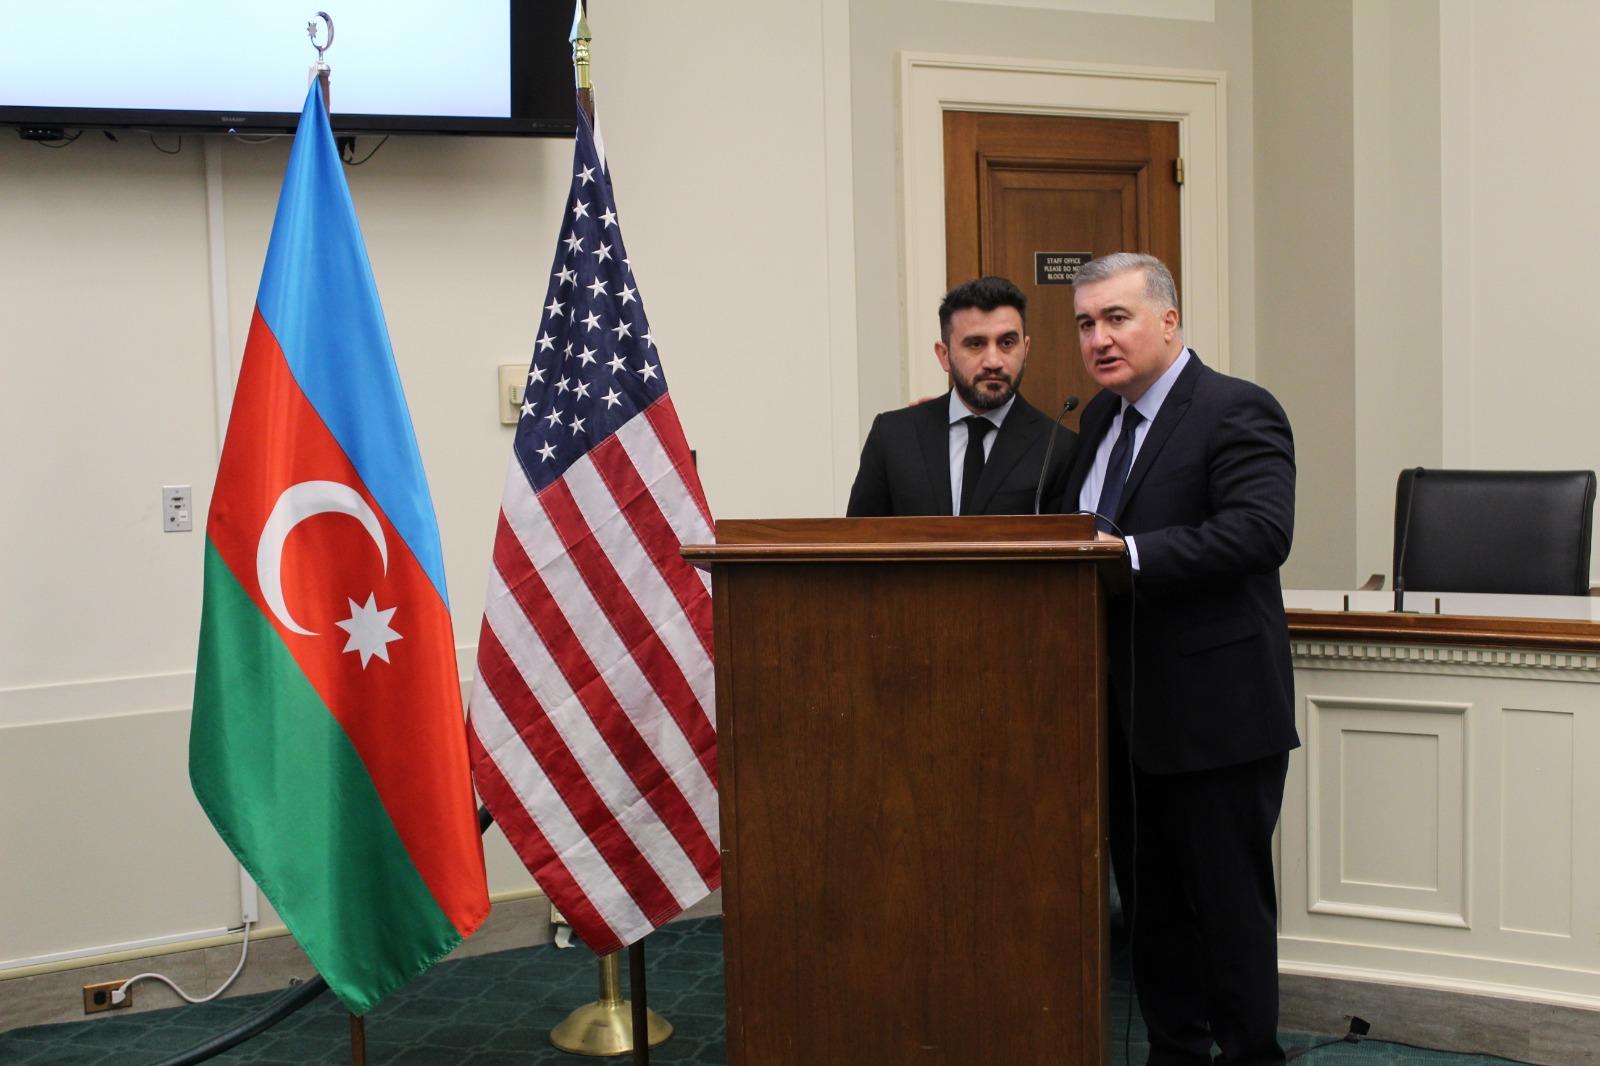 Event dedicated to 27th anniversary of Khojaly genocide held in US Congress (PHOTO)